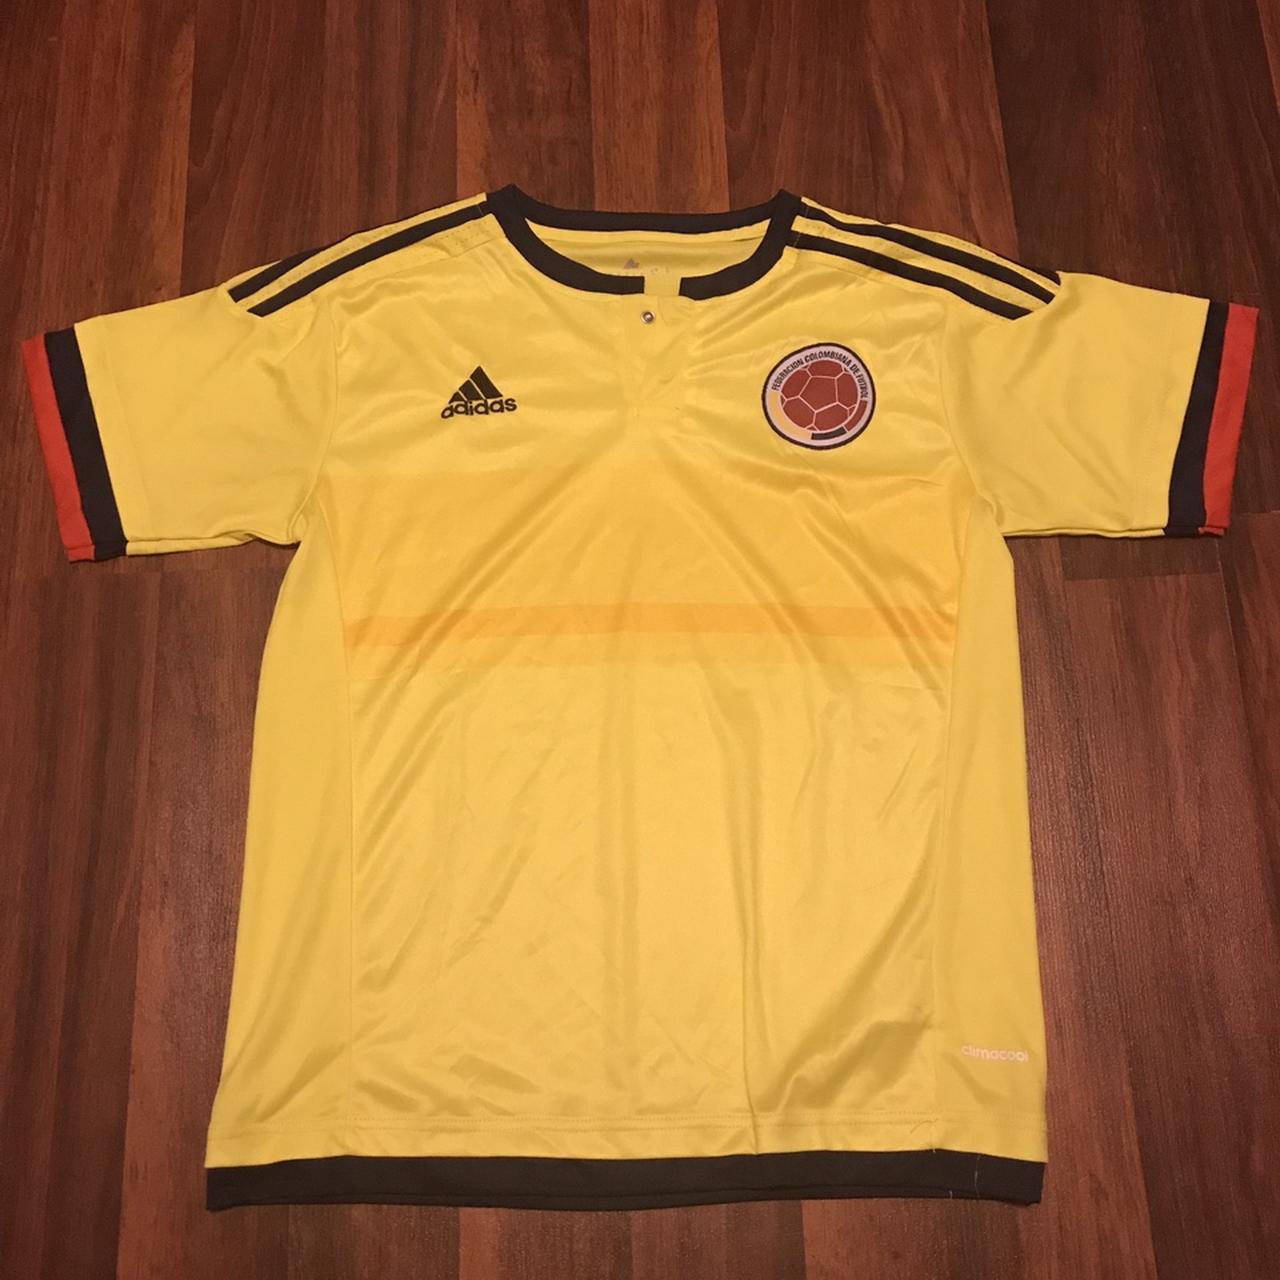 Colombia Soccer National Team Adidas Youth Size 16 Yellow Soccer Jersey